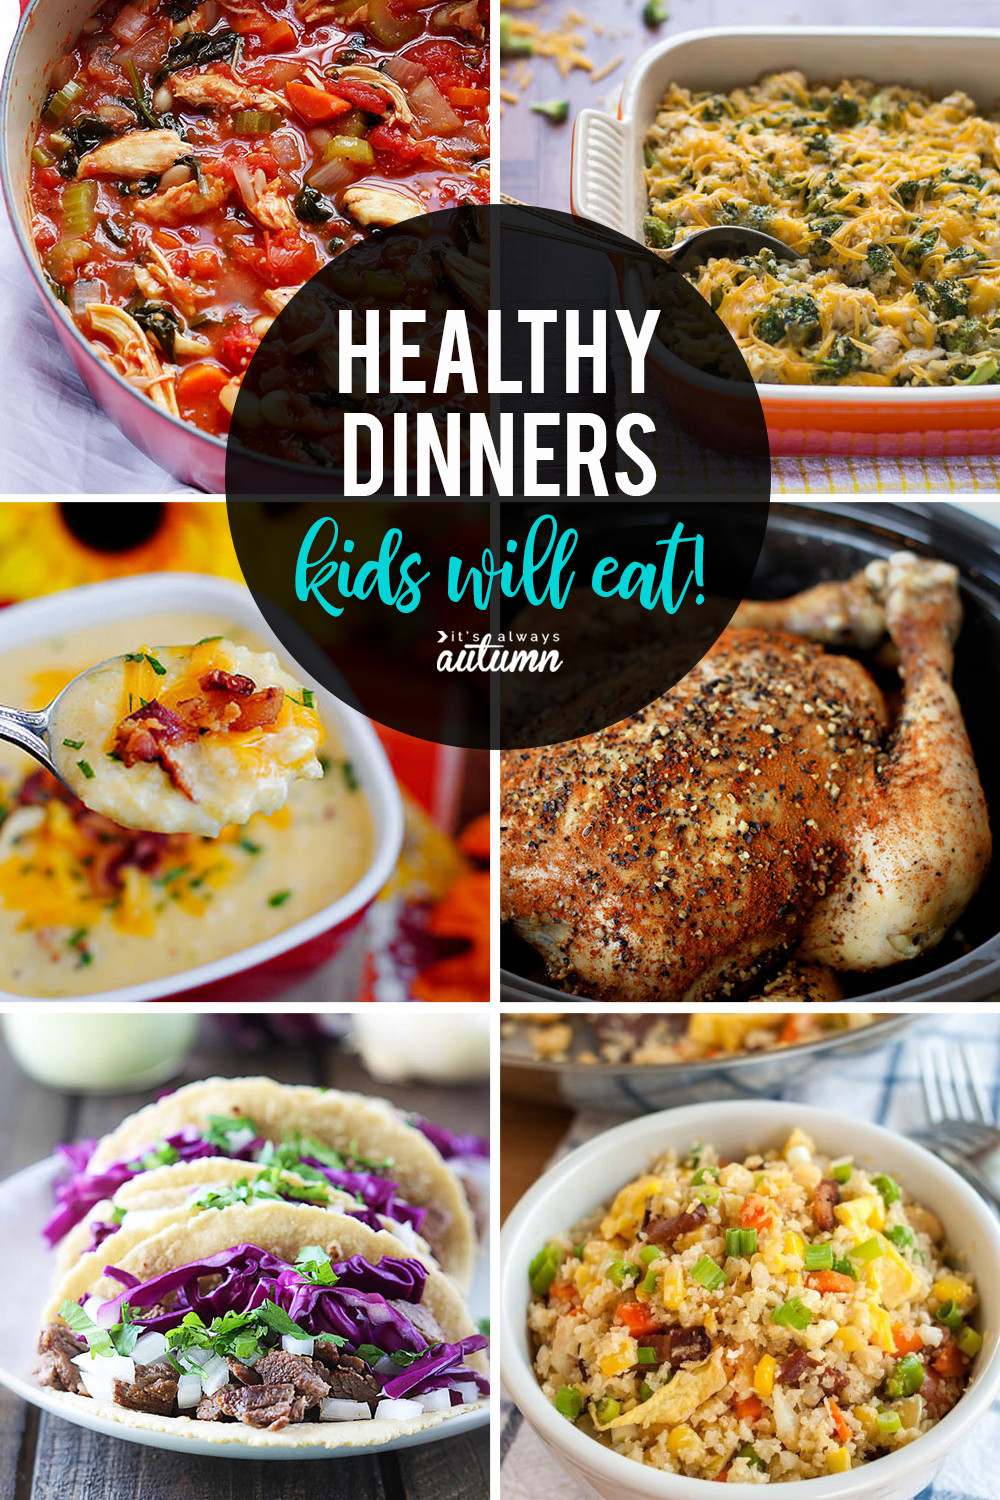 Healthy Dinner Ideas For Kids
 20 healthy easy recipes your kids will actually want to